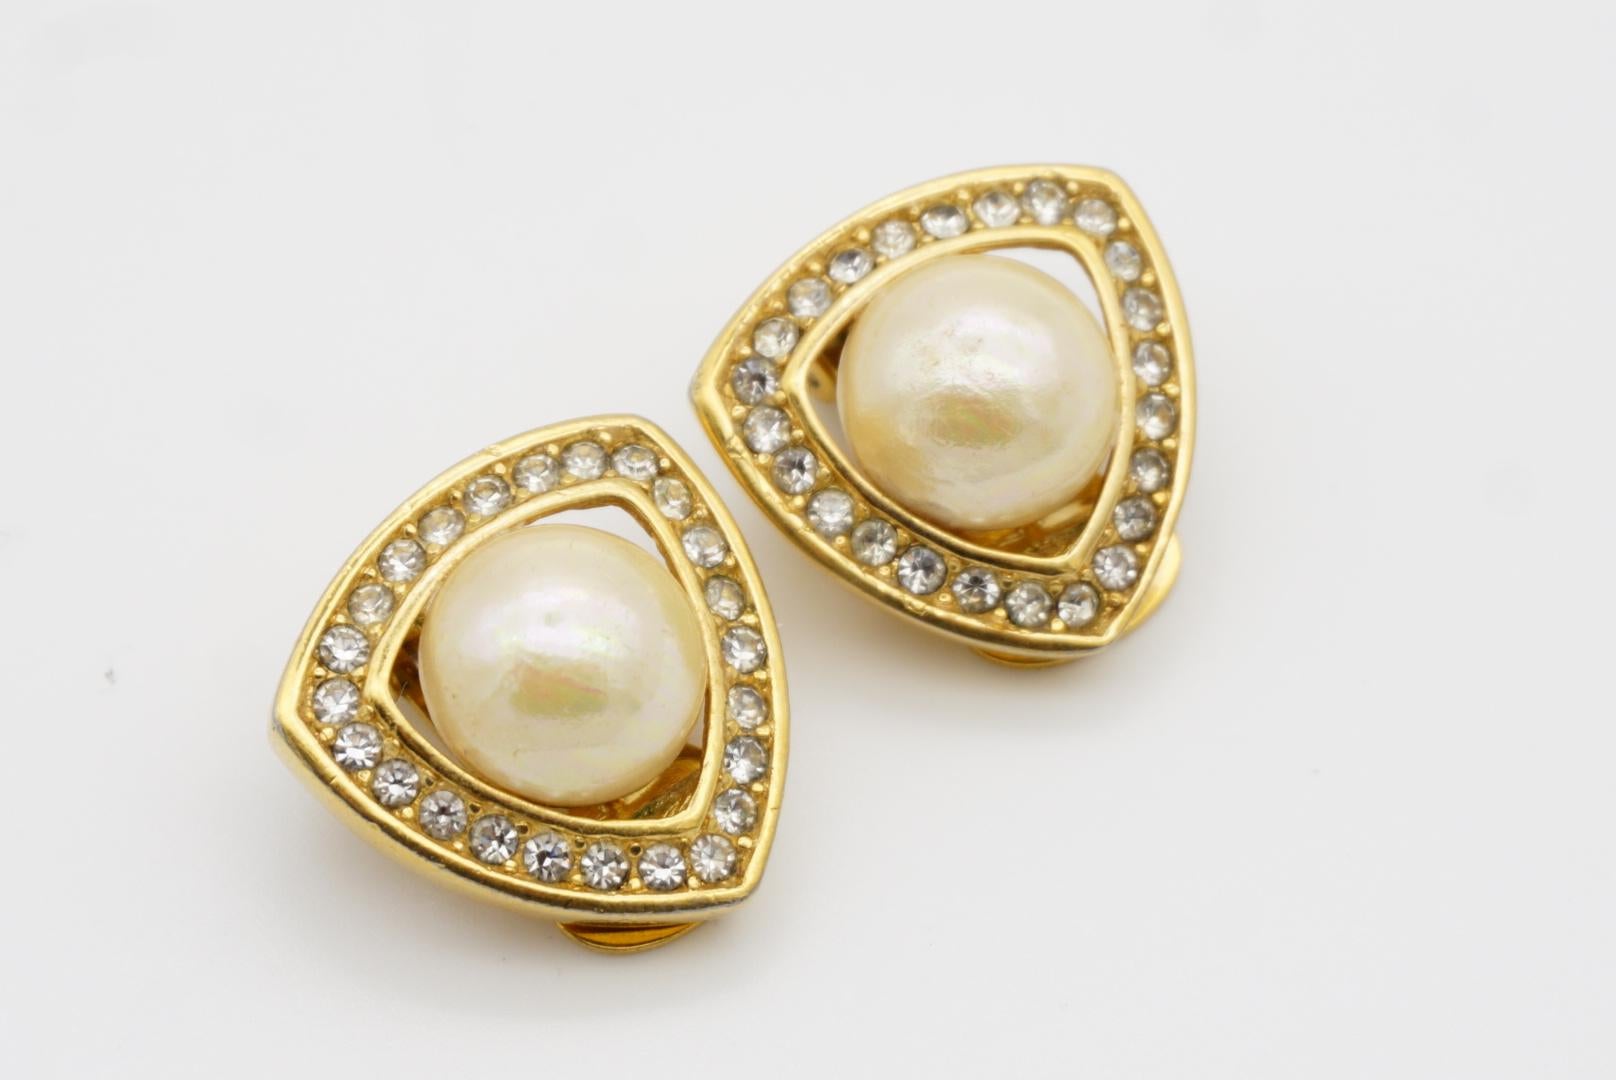 Christian Dior Vintage 1980s Triangle Openwork White Pearls Crystals Earrings For Sale 4